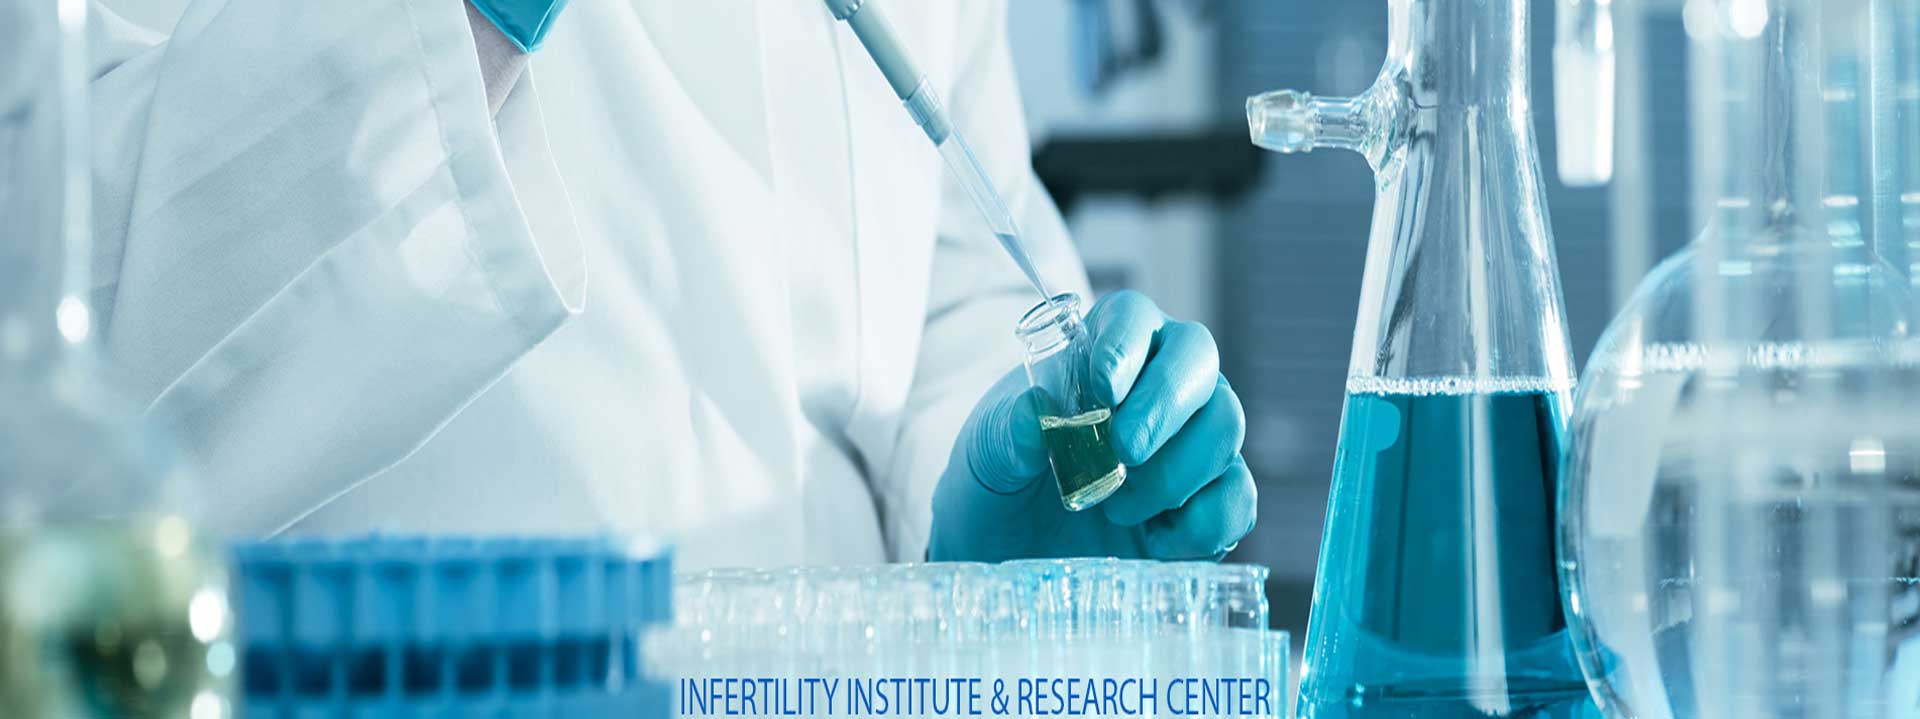 Infertility Institute and Research Centre, Near Prashant Theatre, Secunderabad | Infertility Treatments and Services  